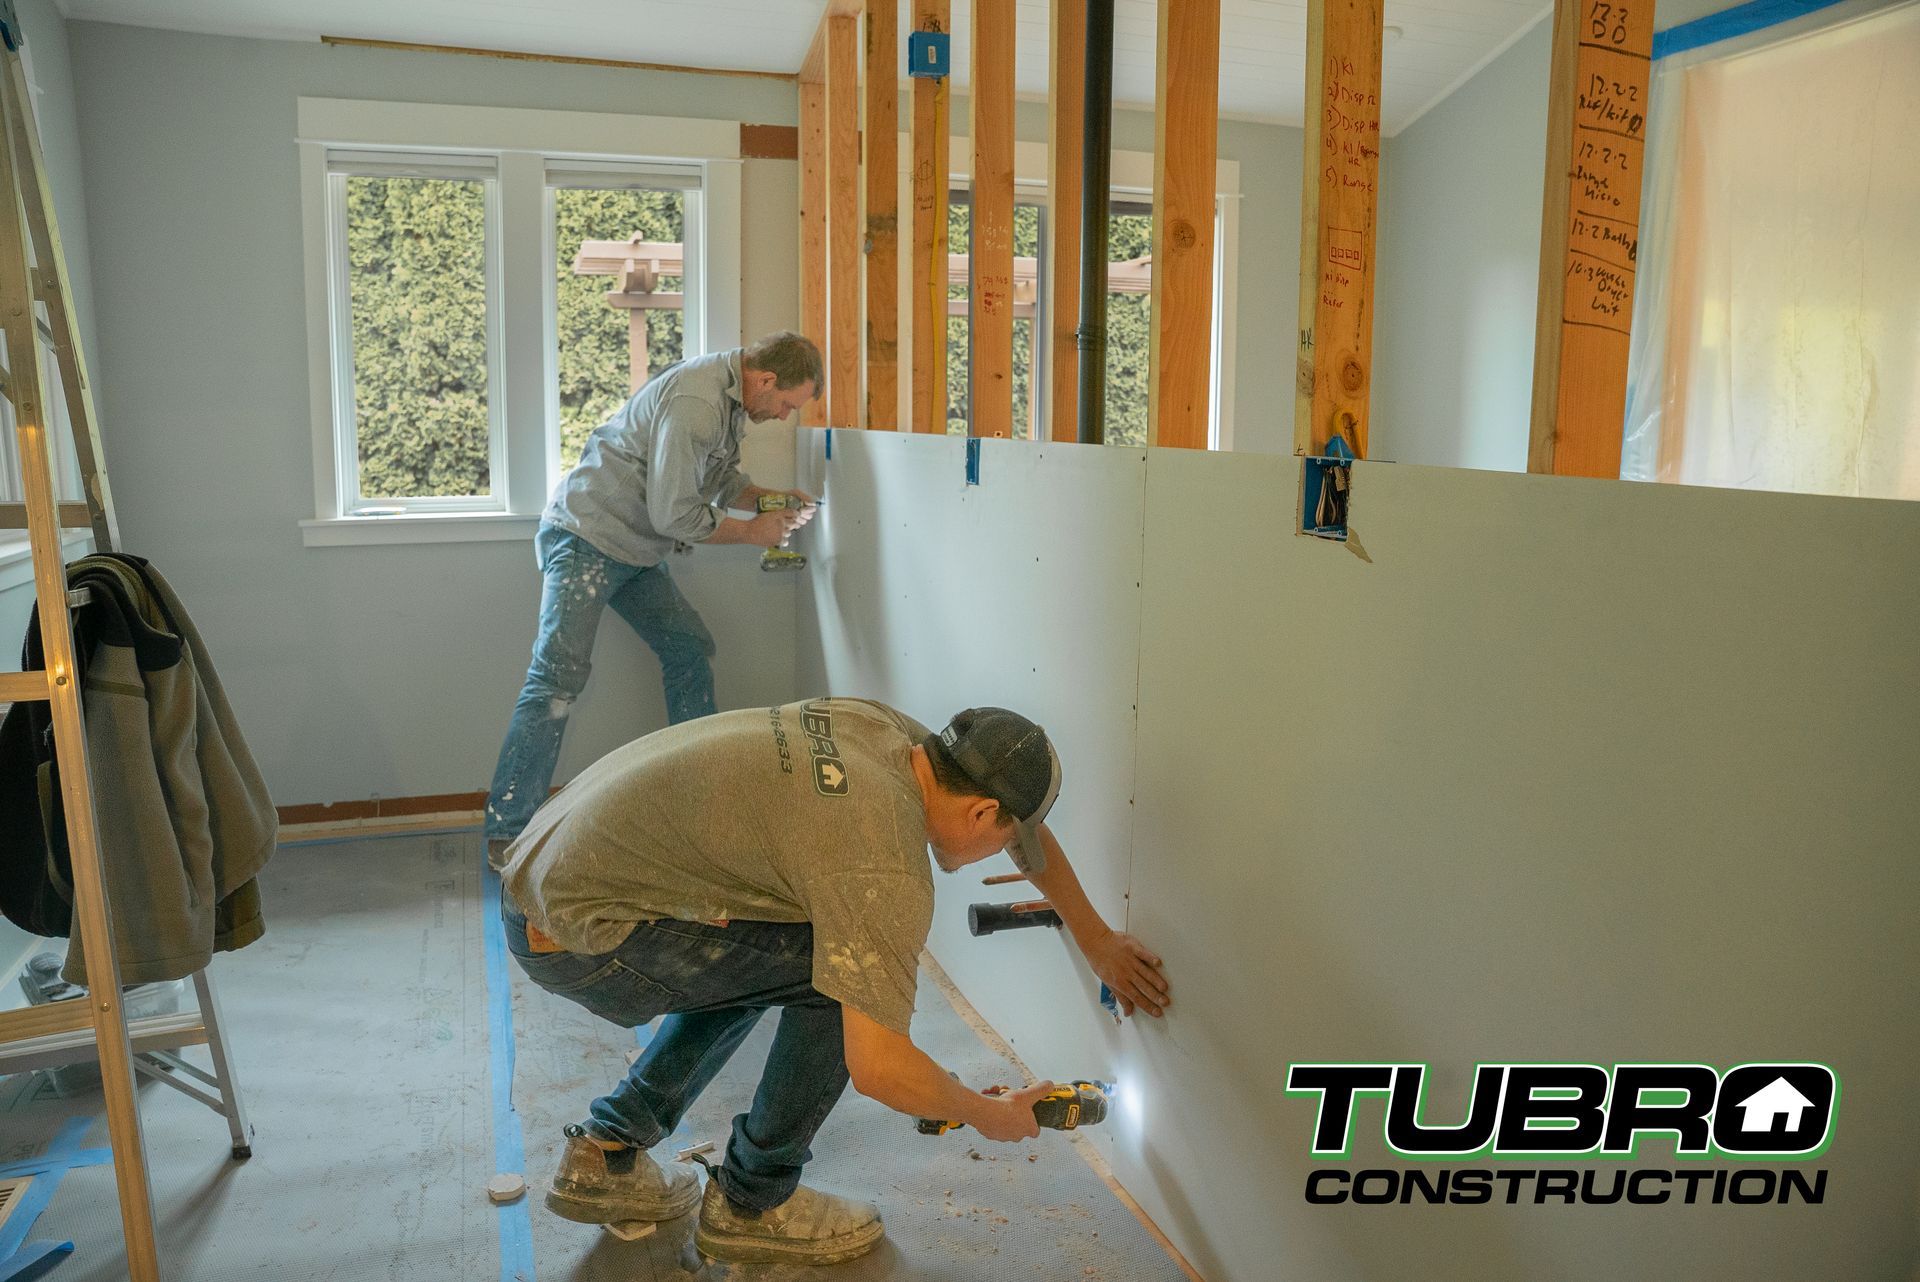 Workers installing new wall during a home renovation